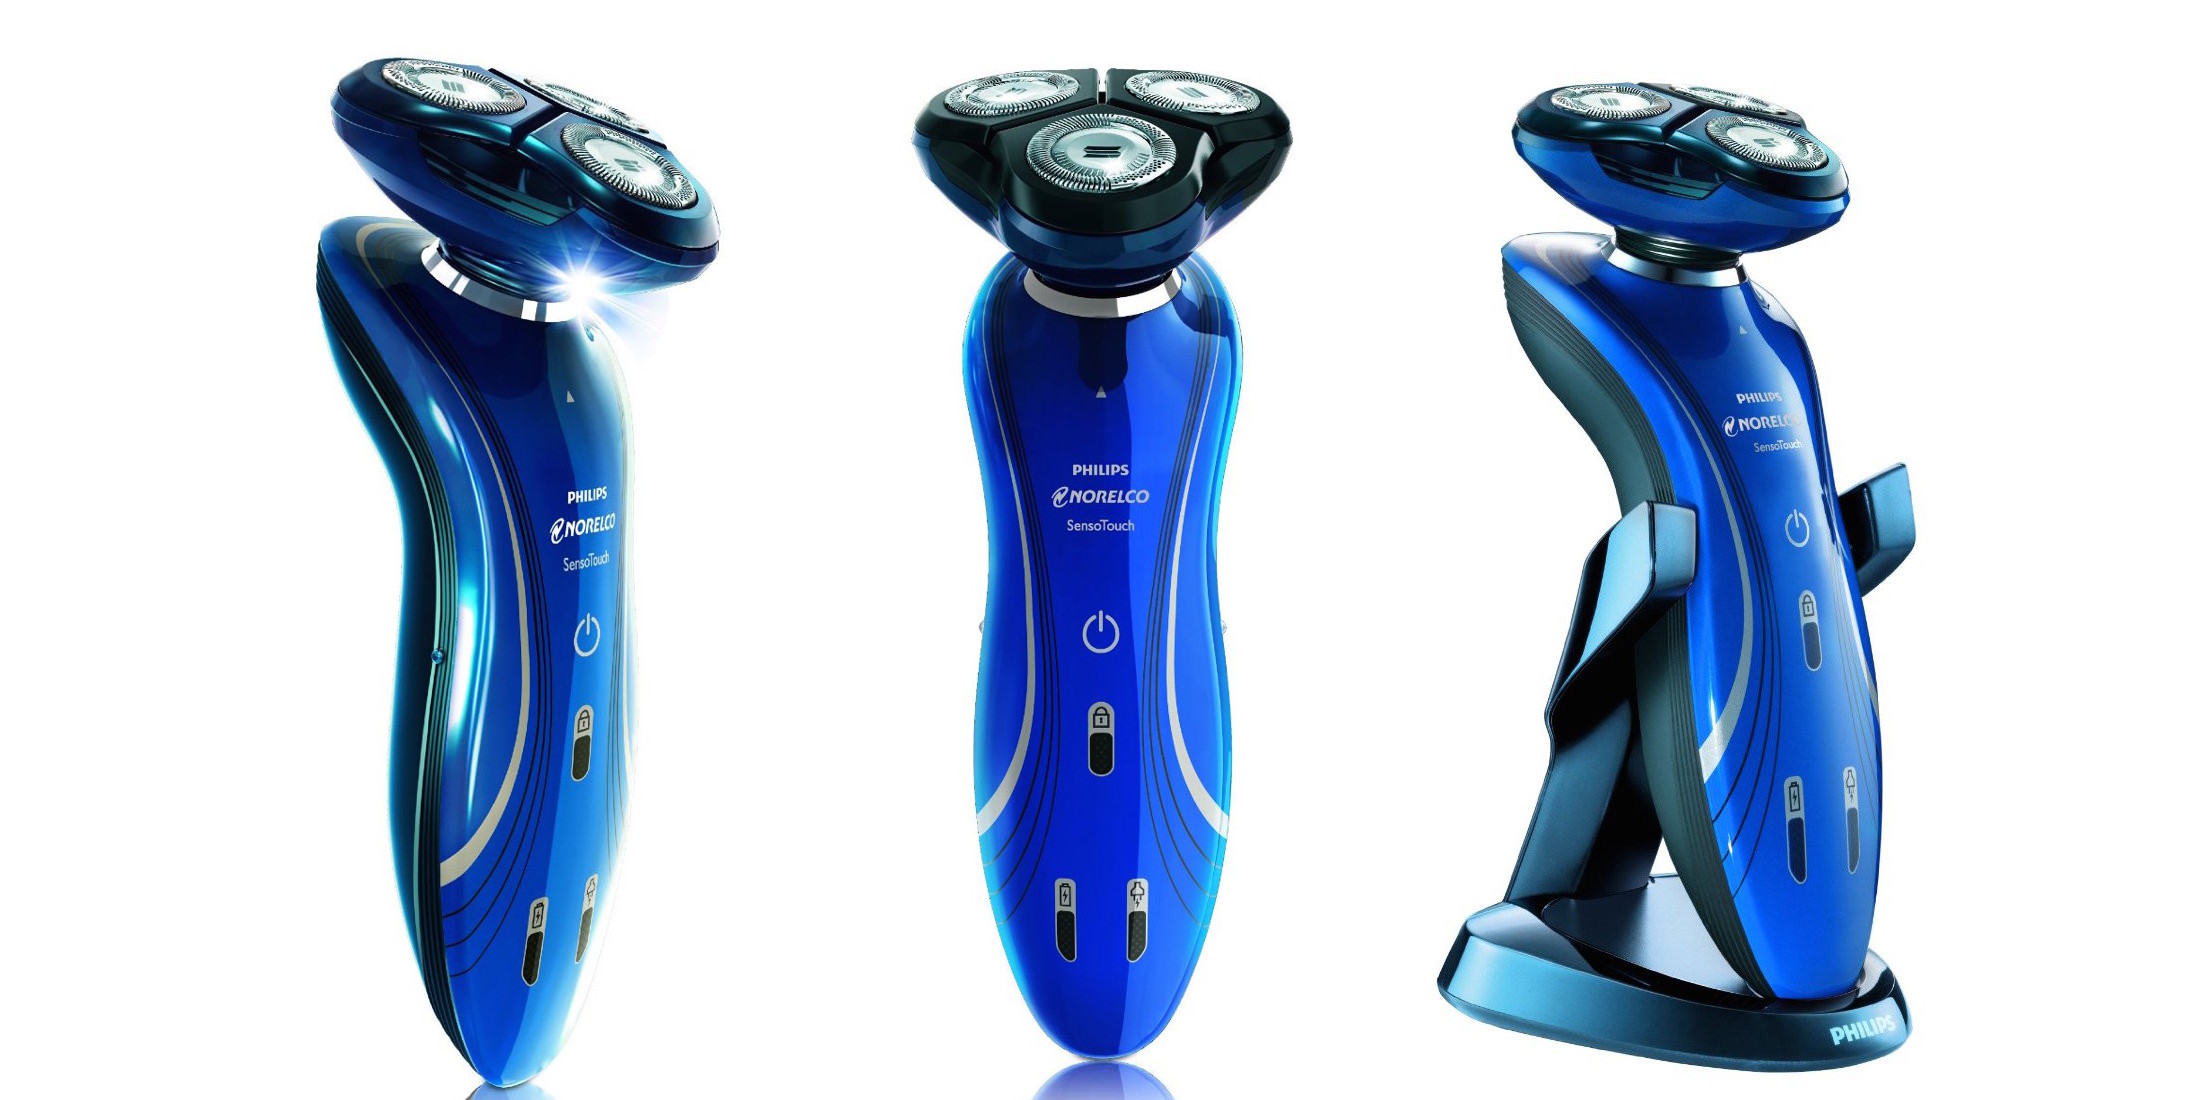 Time To Replace Your Old Shaver With A Philips Norelco 6100 And Charging